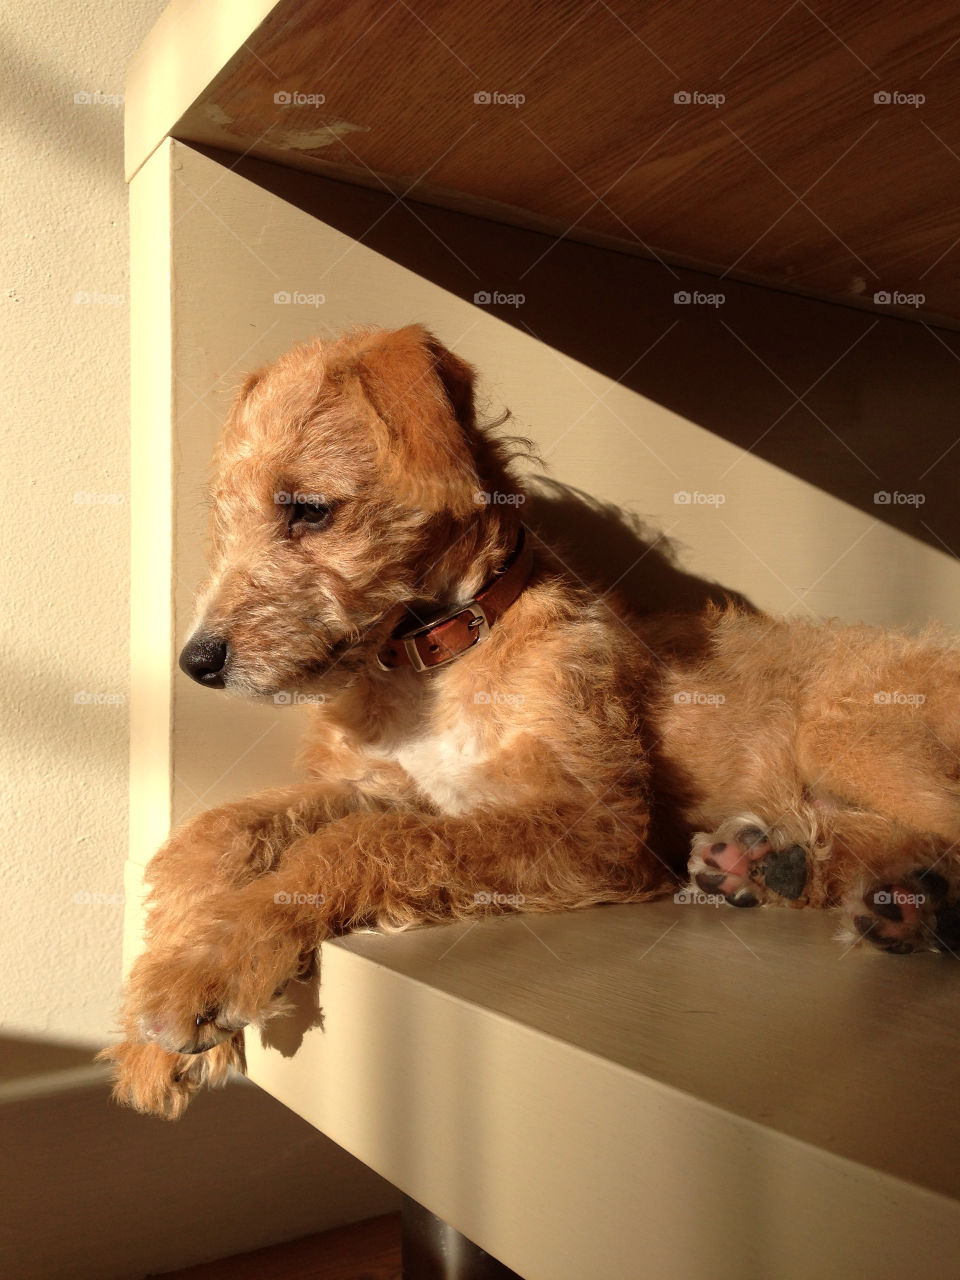 jackapoo rack russell puppy in sun dog sat on table by cyberegg